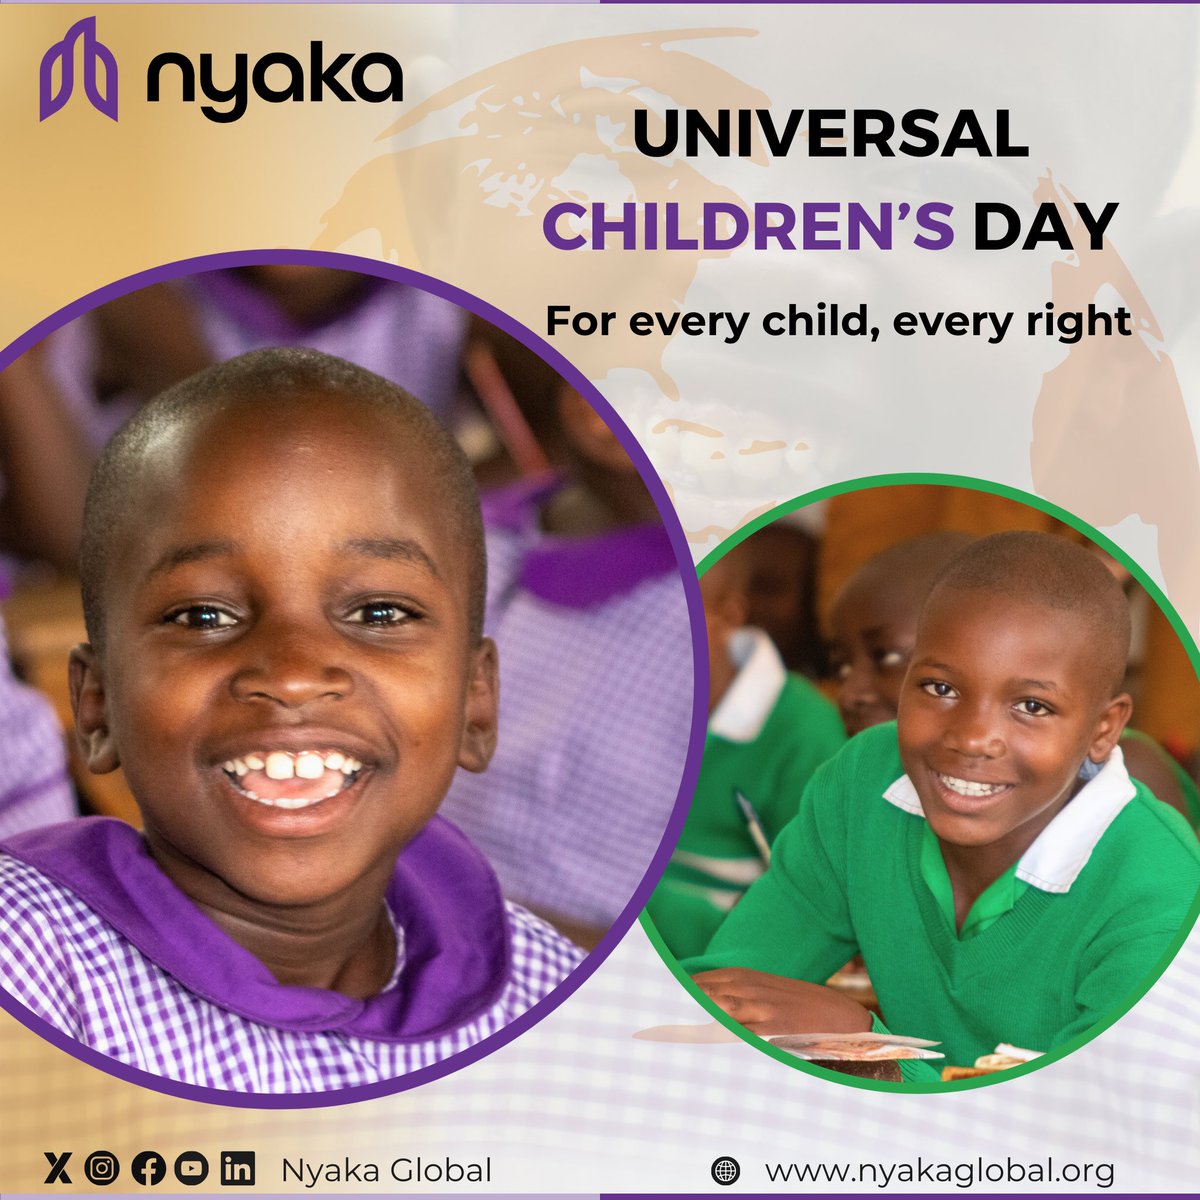 Happy Universal Children’s Day!   

At Nyaka, our holistic model ensures that vulnerable children have access to all their basic needs and rights, creating an environment where they learn, grow, and thrive.   

#NyakaLearners #UniversalChildrensDay #WorldChildrensDay